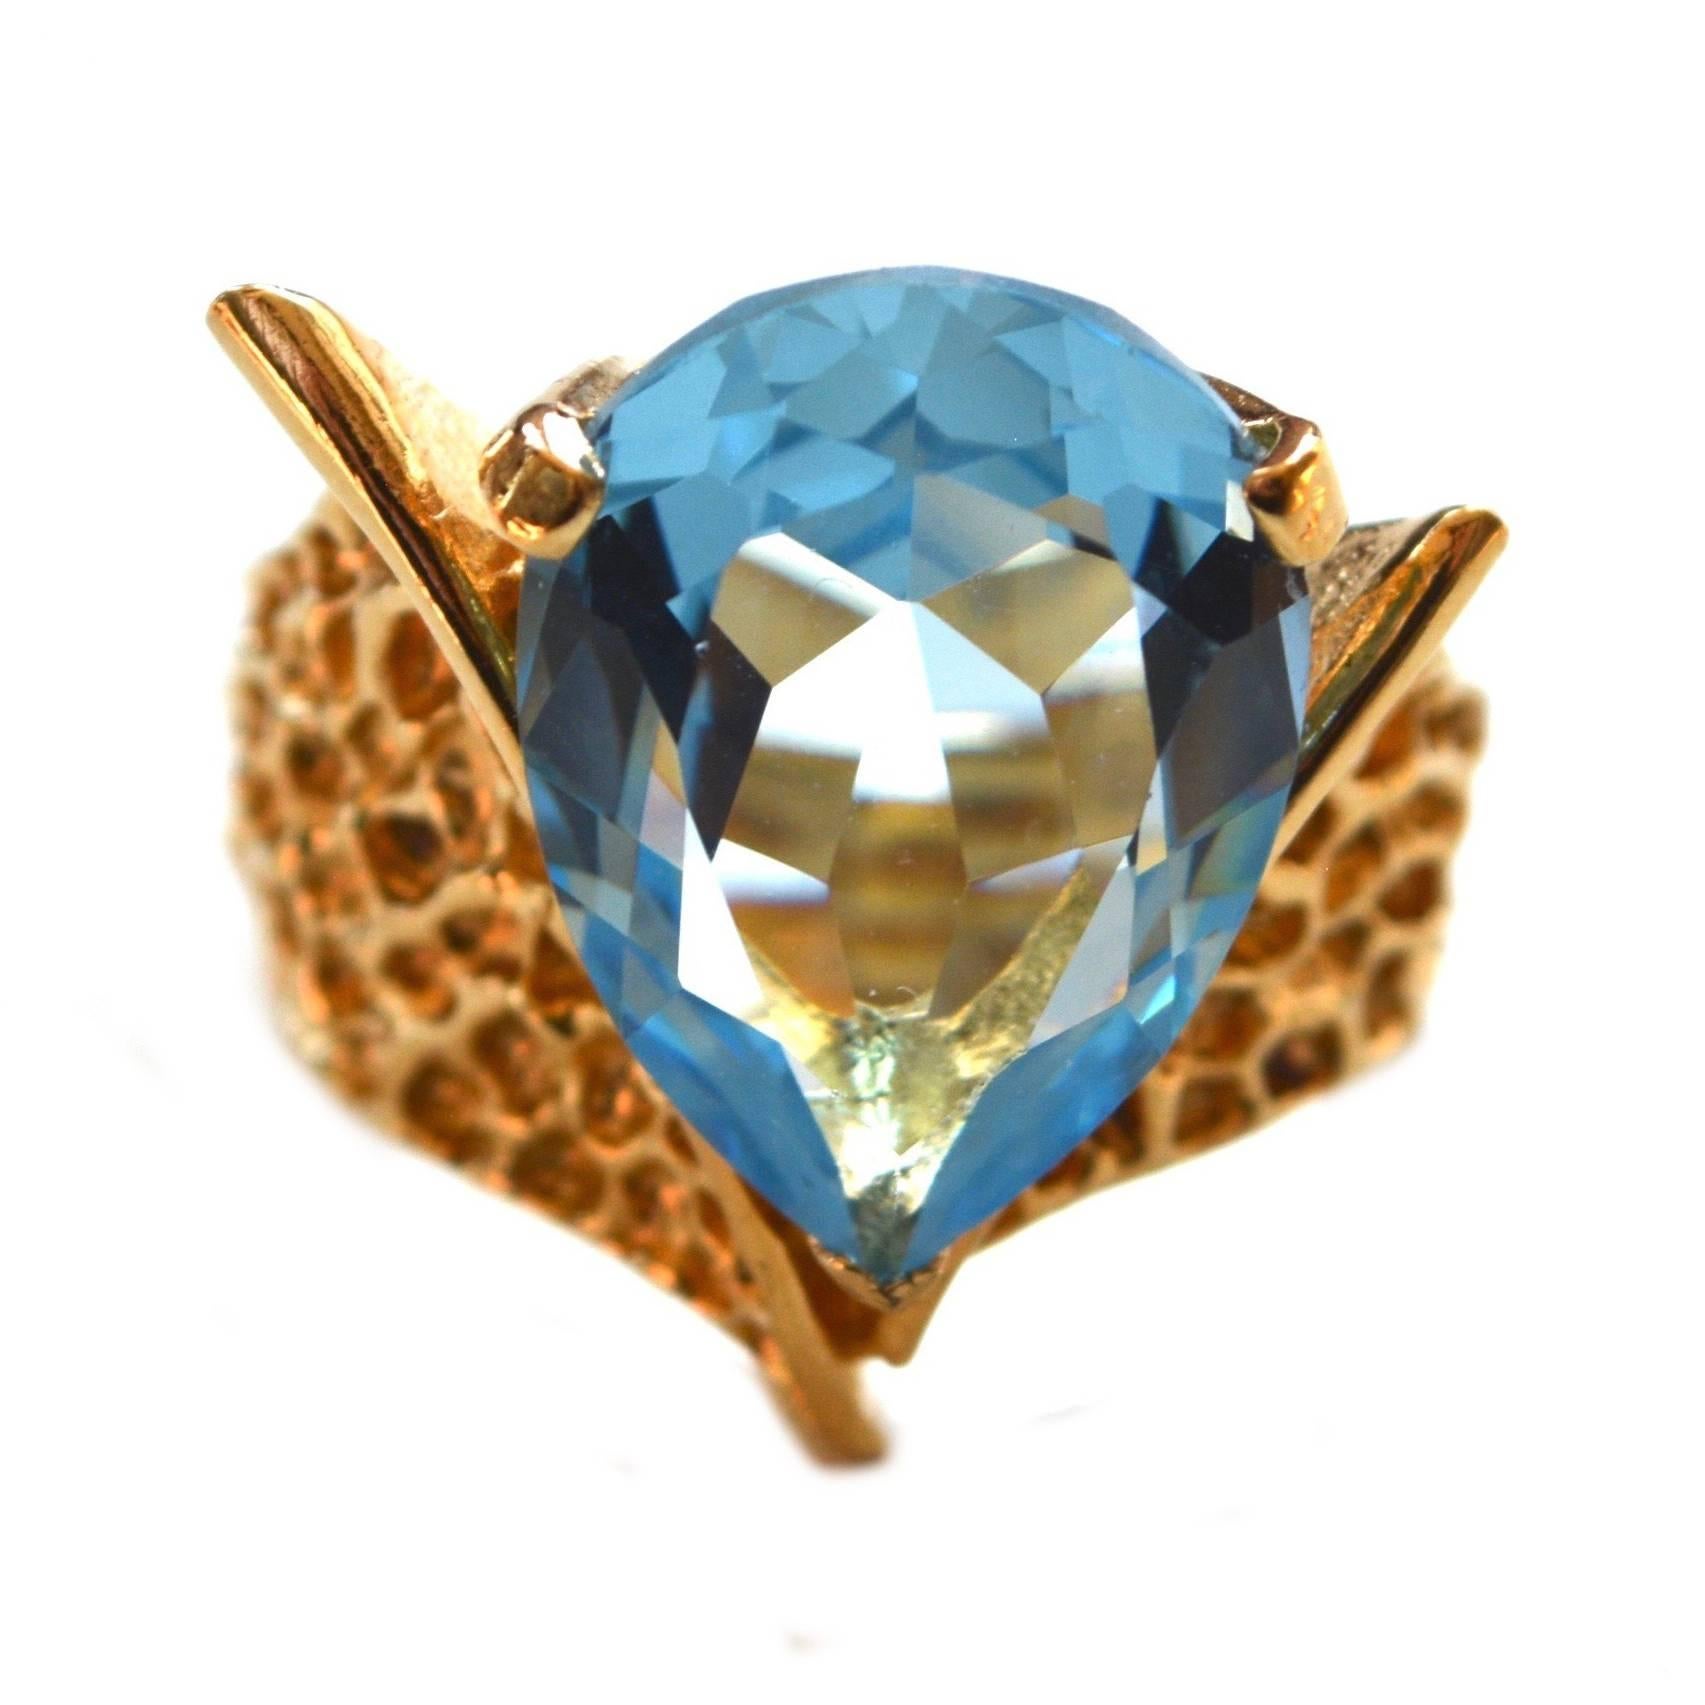 Signed Panetta sterling gilt blue glass ring. Larger cut glass stone is vibrant and in excellent condition. Size 7. Face is about .75